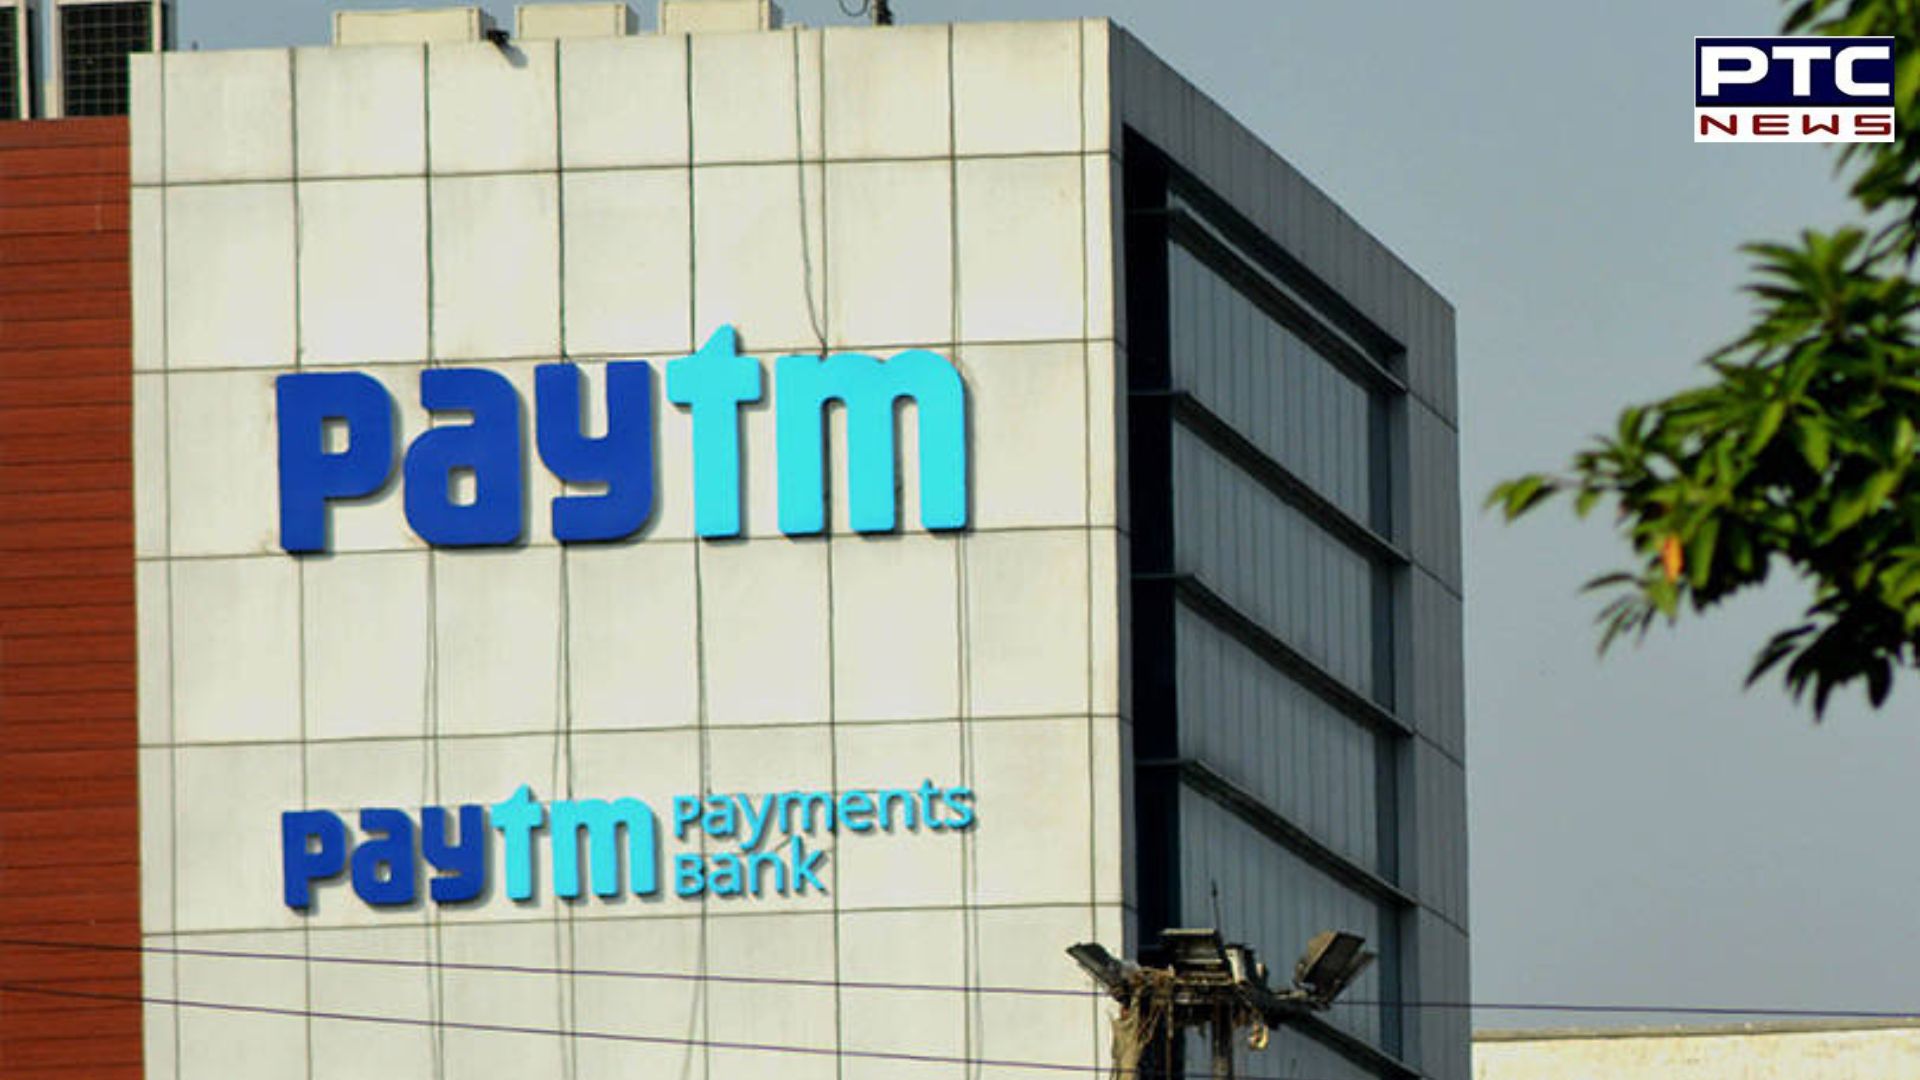 Paytm Payments Bank fined Rs 5.49 crore for violating money laundering norms